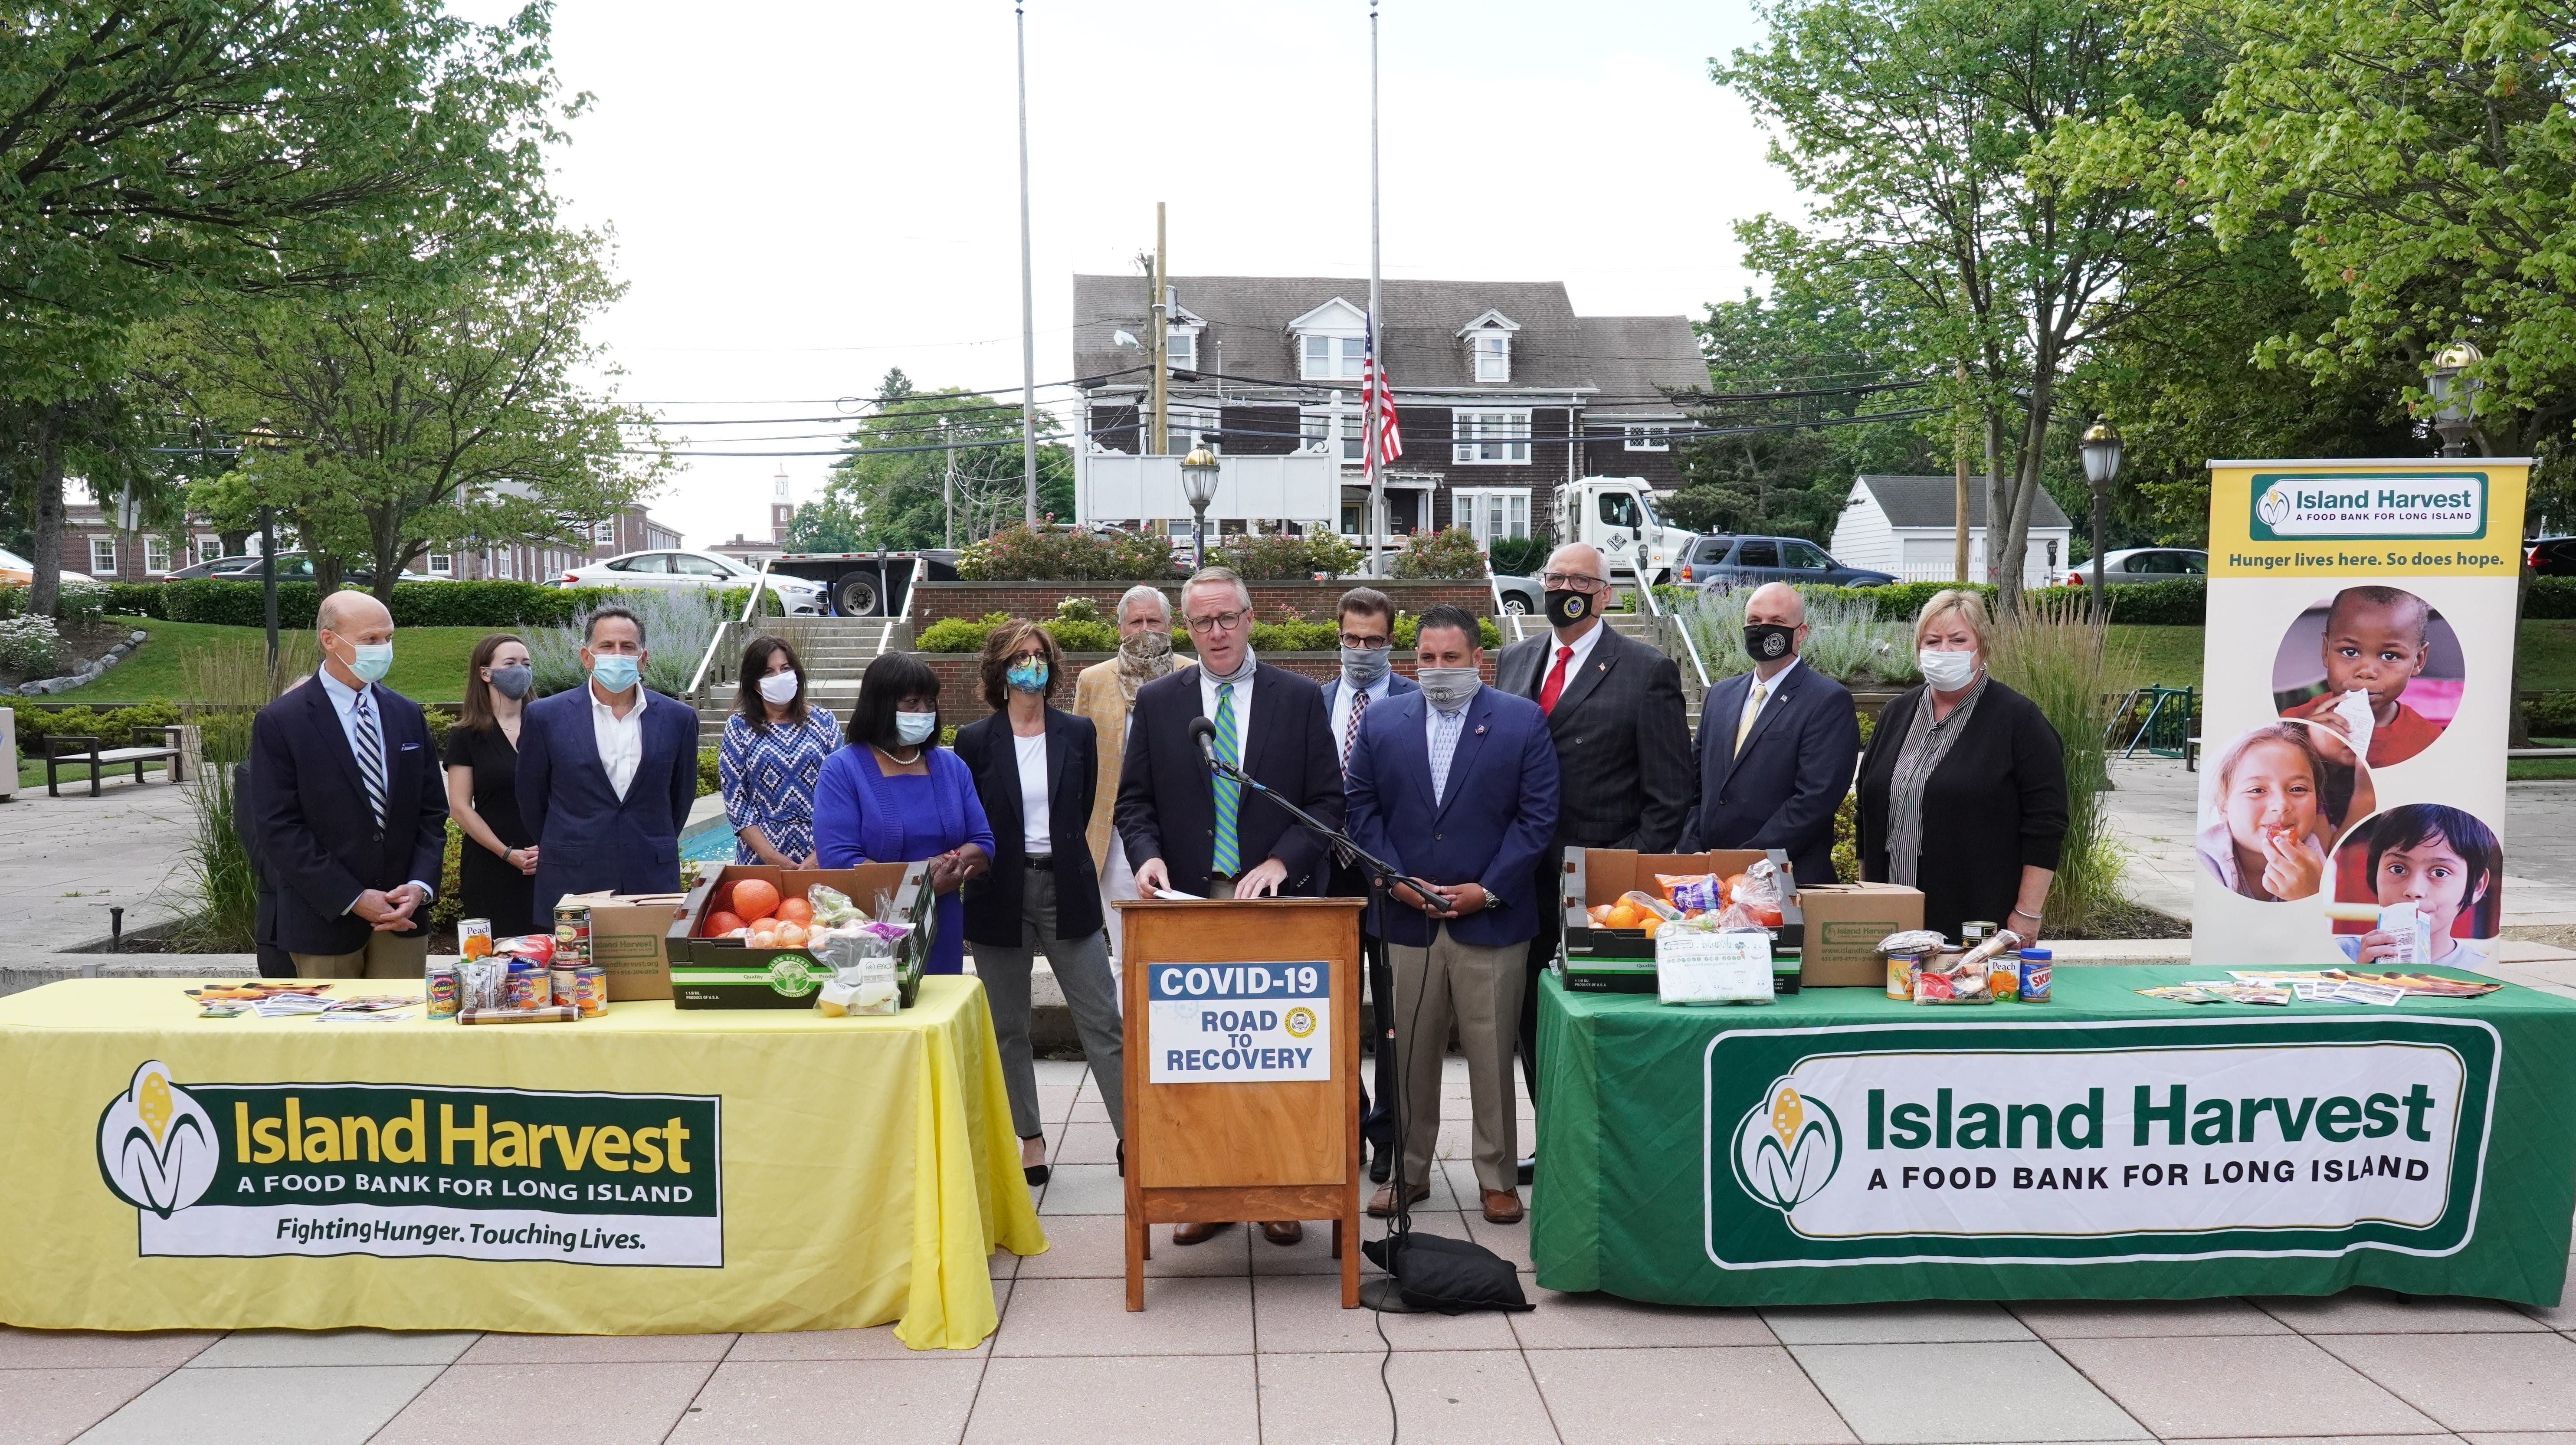 Hempstead announces $2.1M in grant funding for Island Harvest due to COVID-19